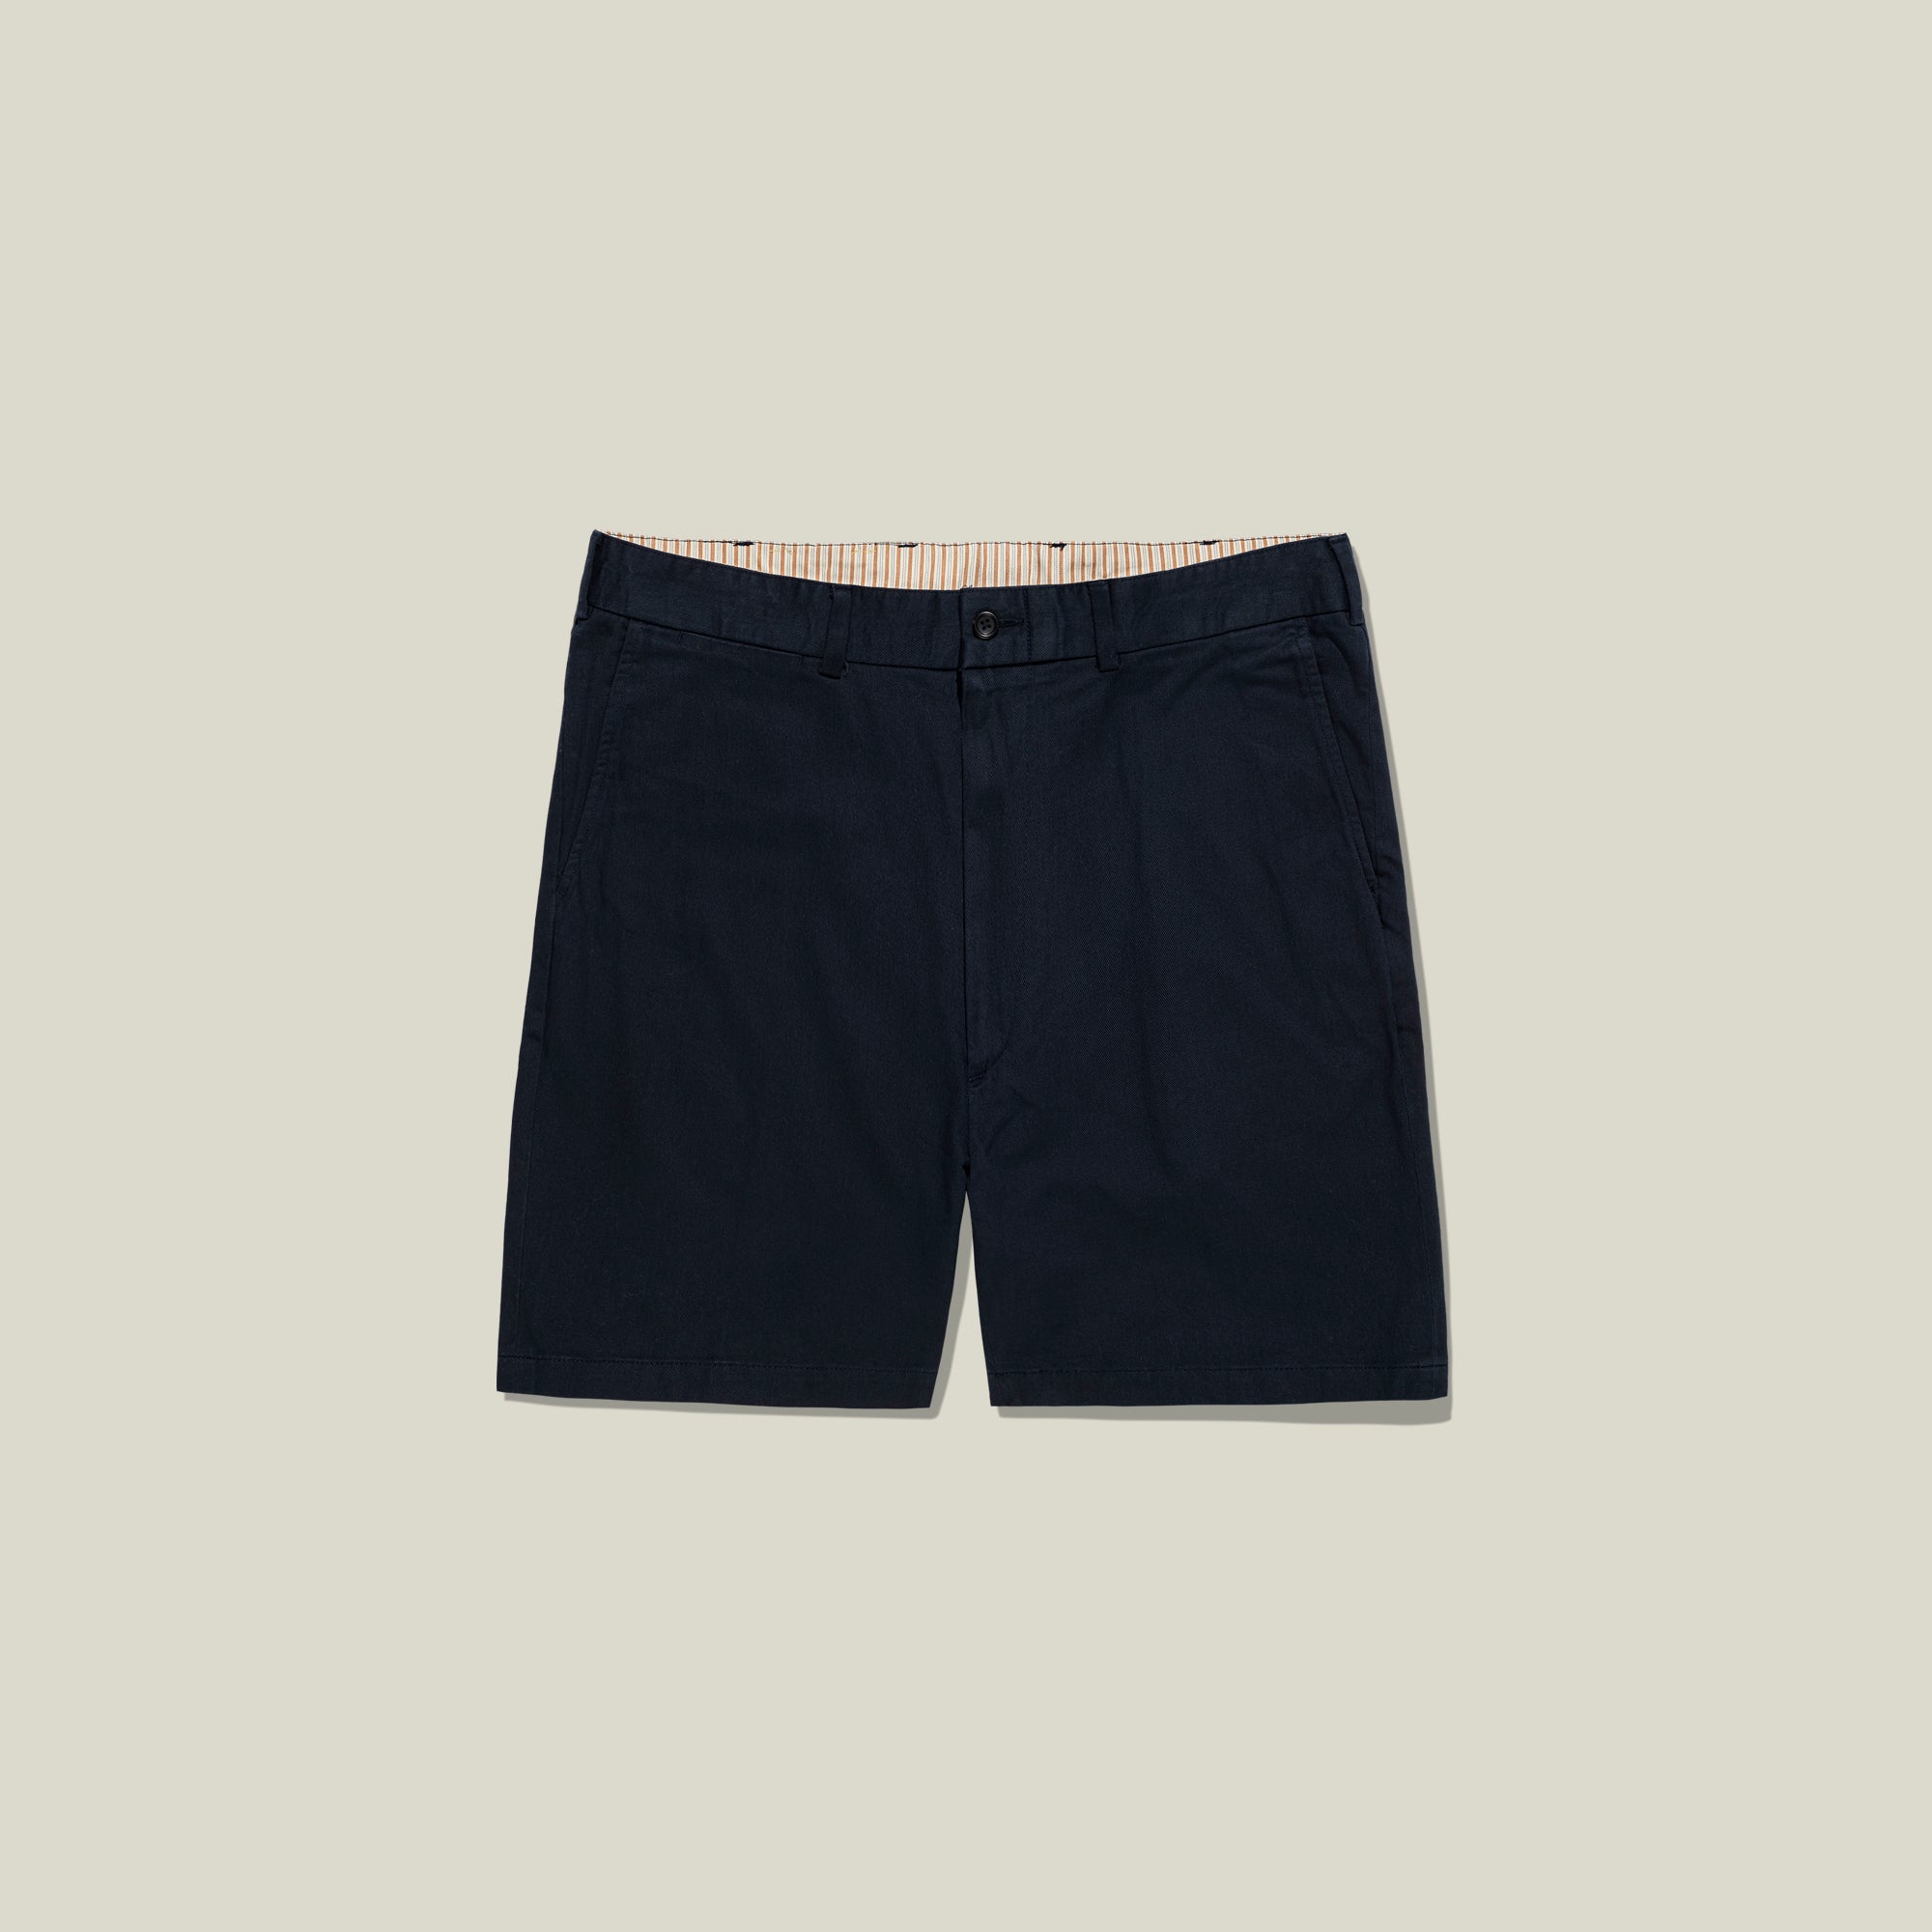 M2S - Classic Fit Short - Vintage Twill